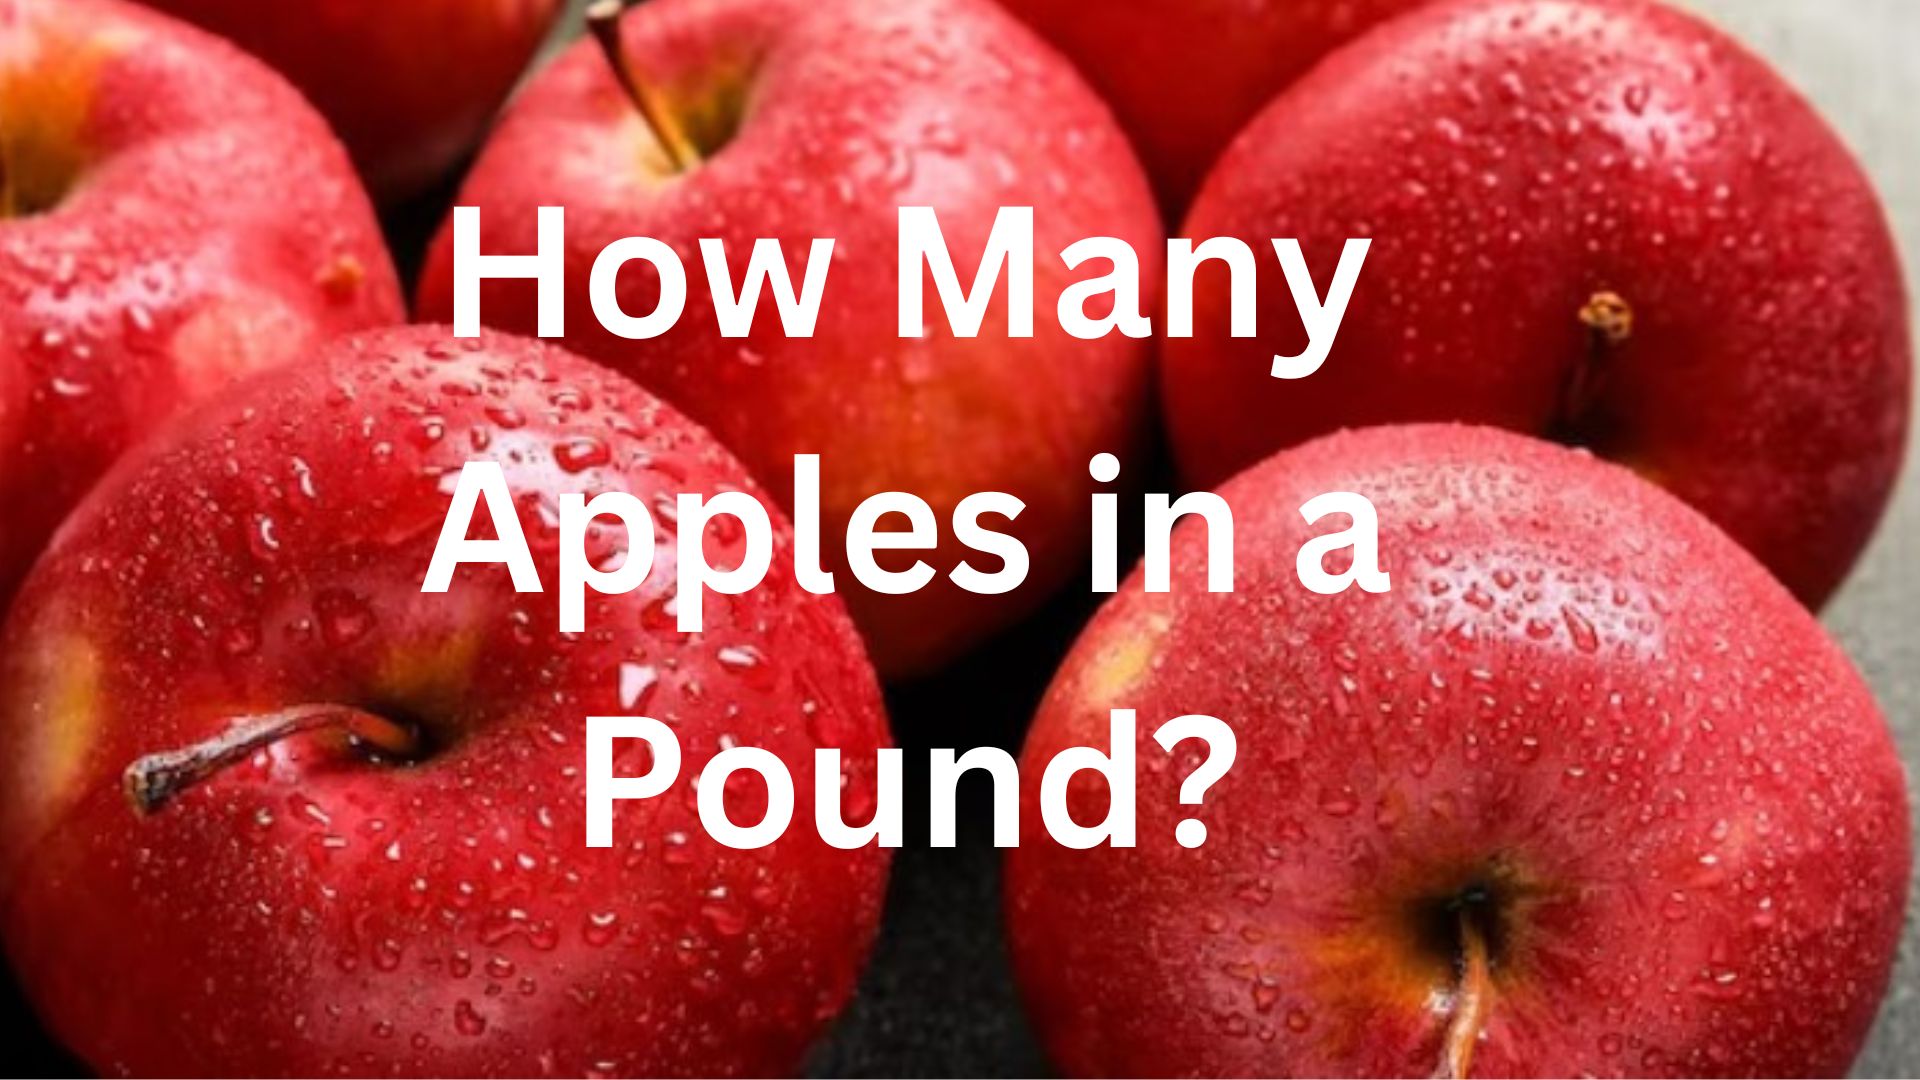 How Many Apples in a Pound